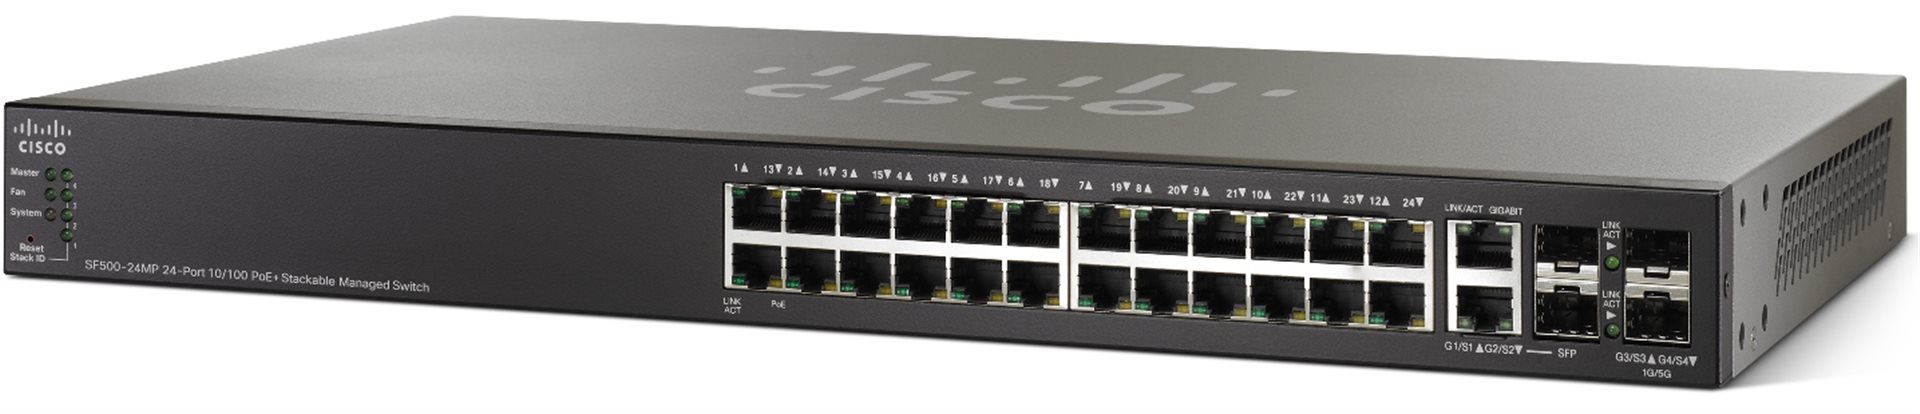 Cisco SF500-24MP-K9 24-port 10/100 Max PoE+ Stackable Managed Switch